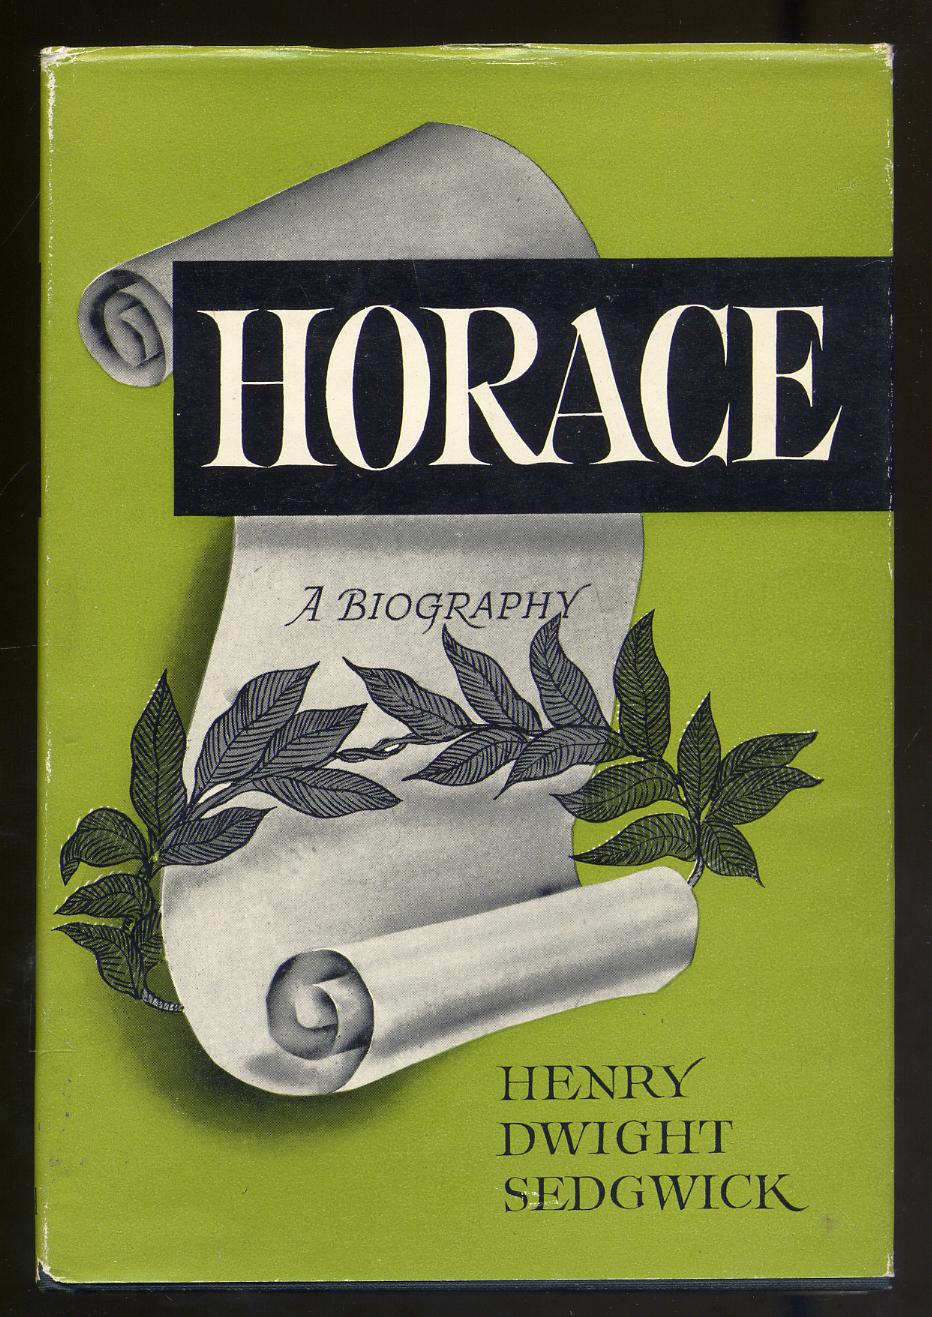 biography of horace in english